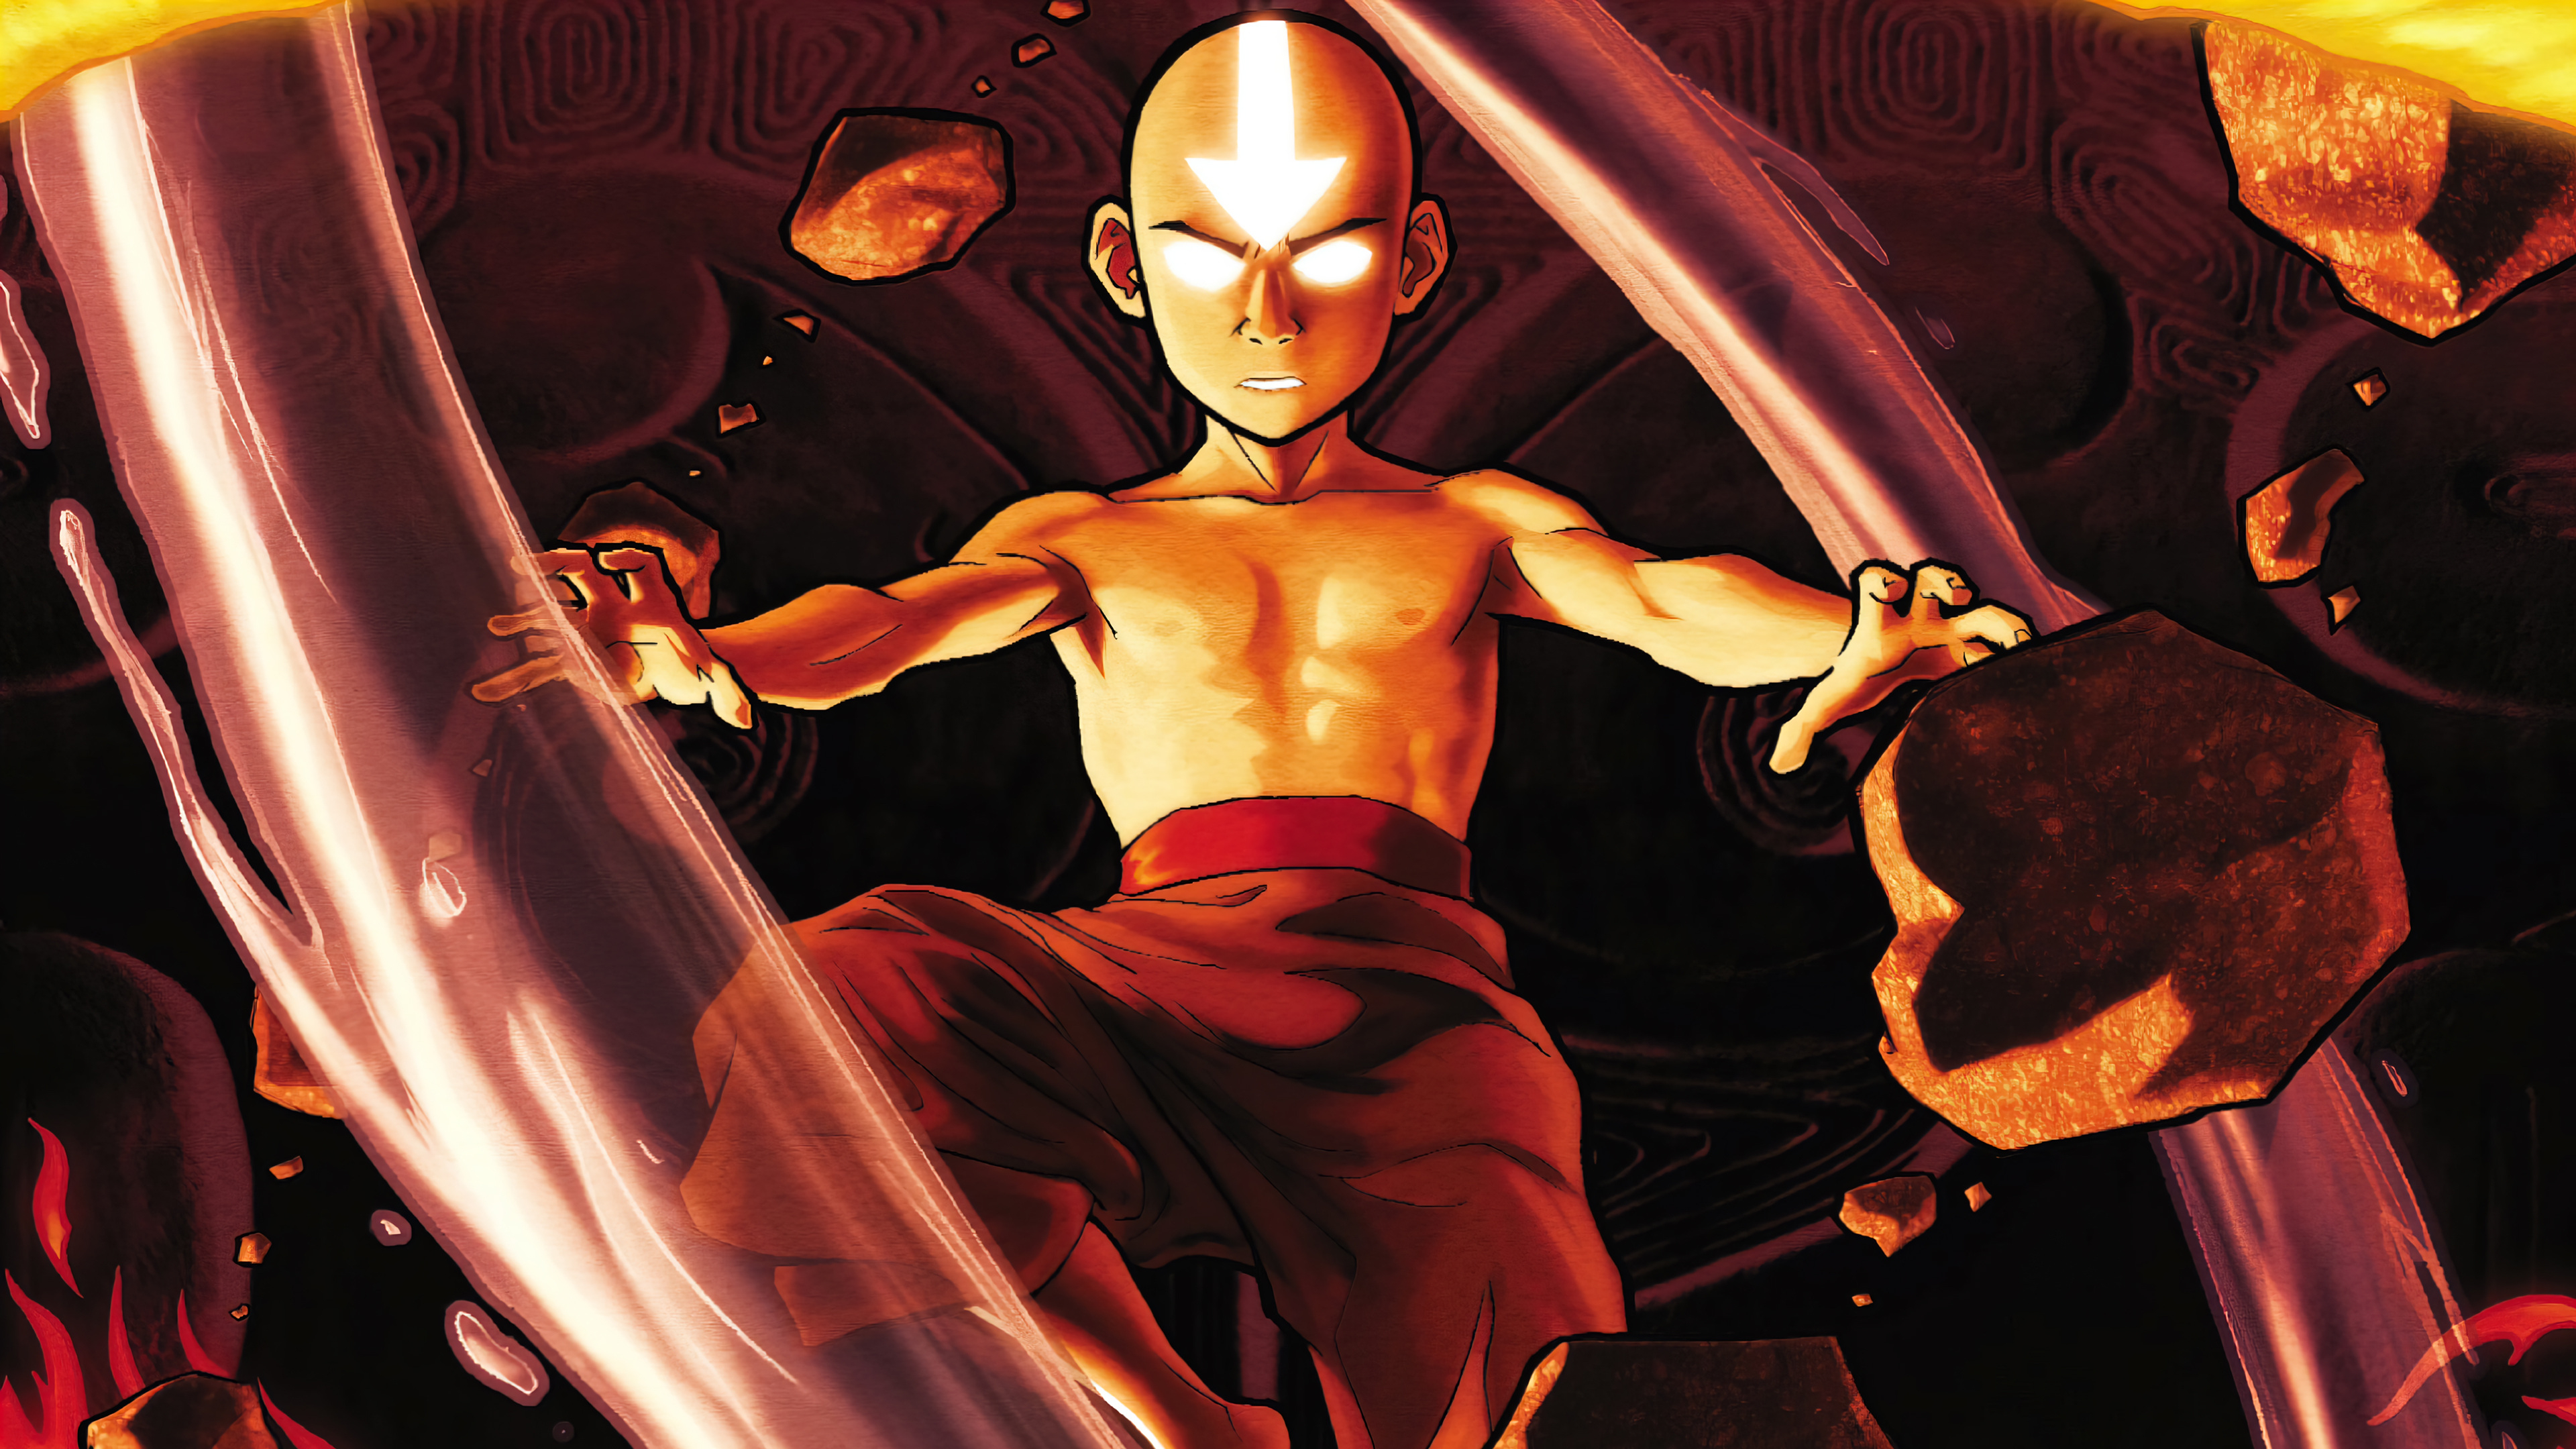 Avatar The Last Airbender The Rise of Kyoshi Free Download